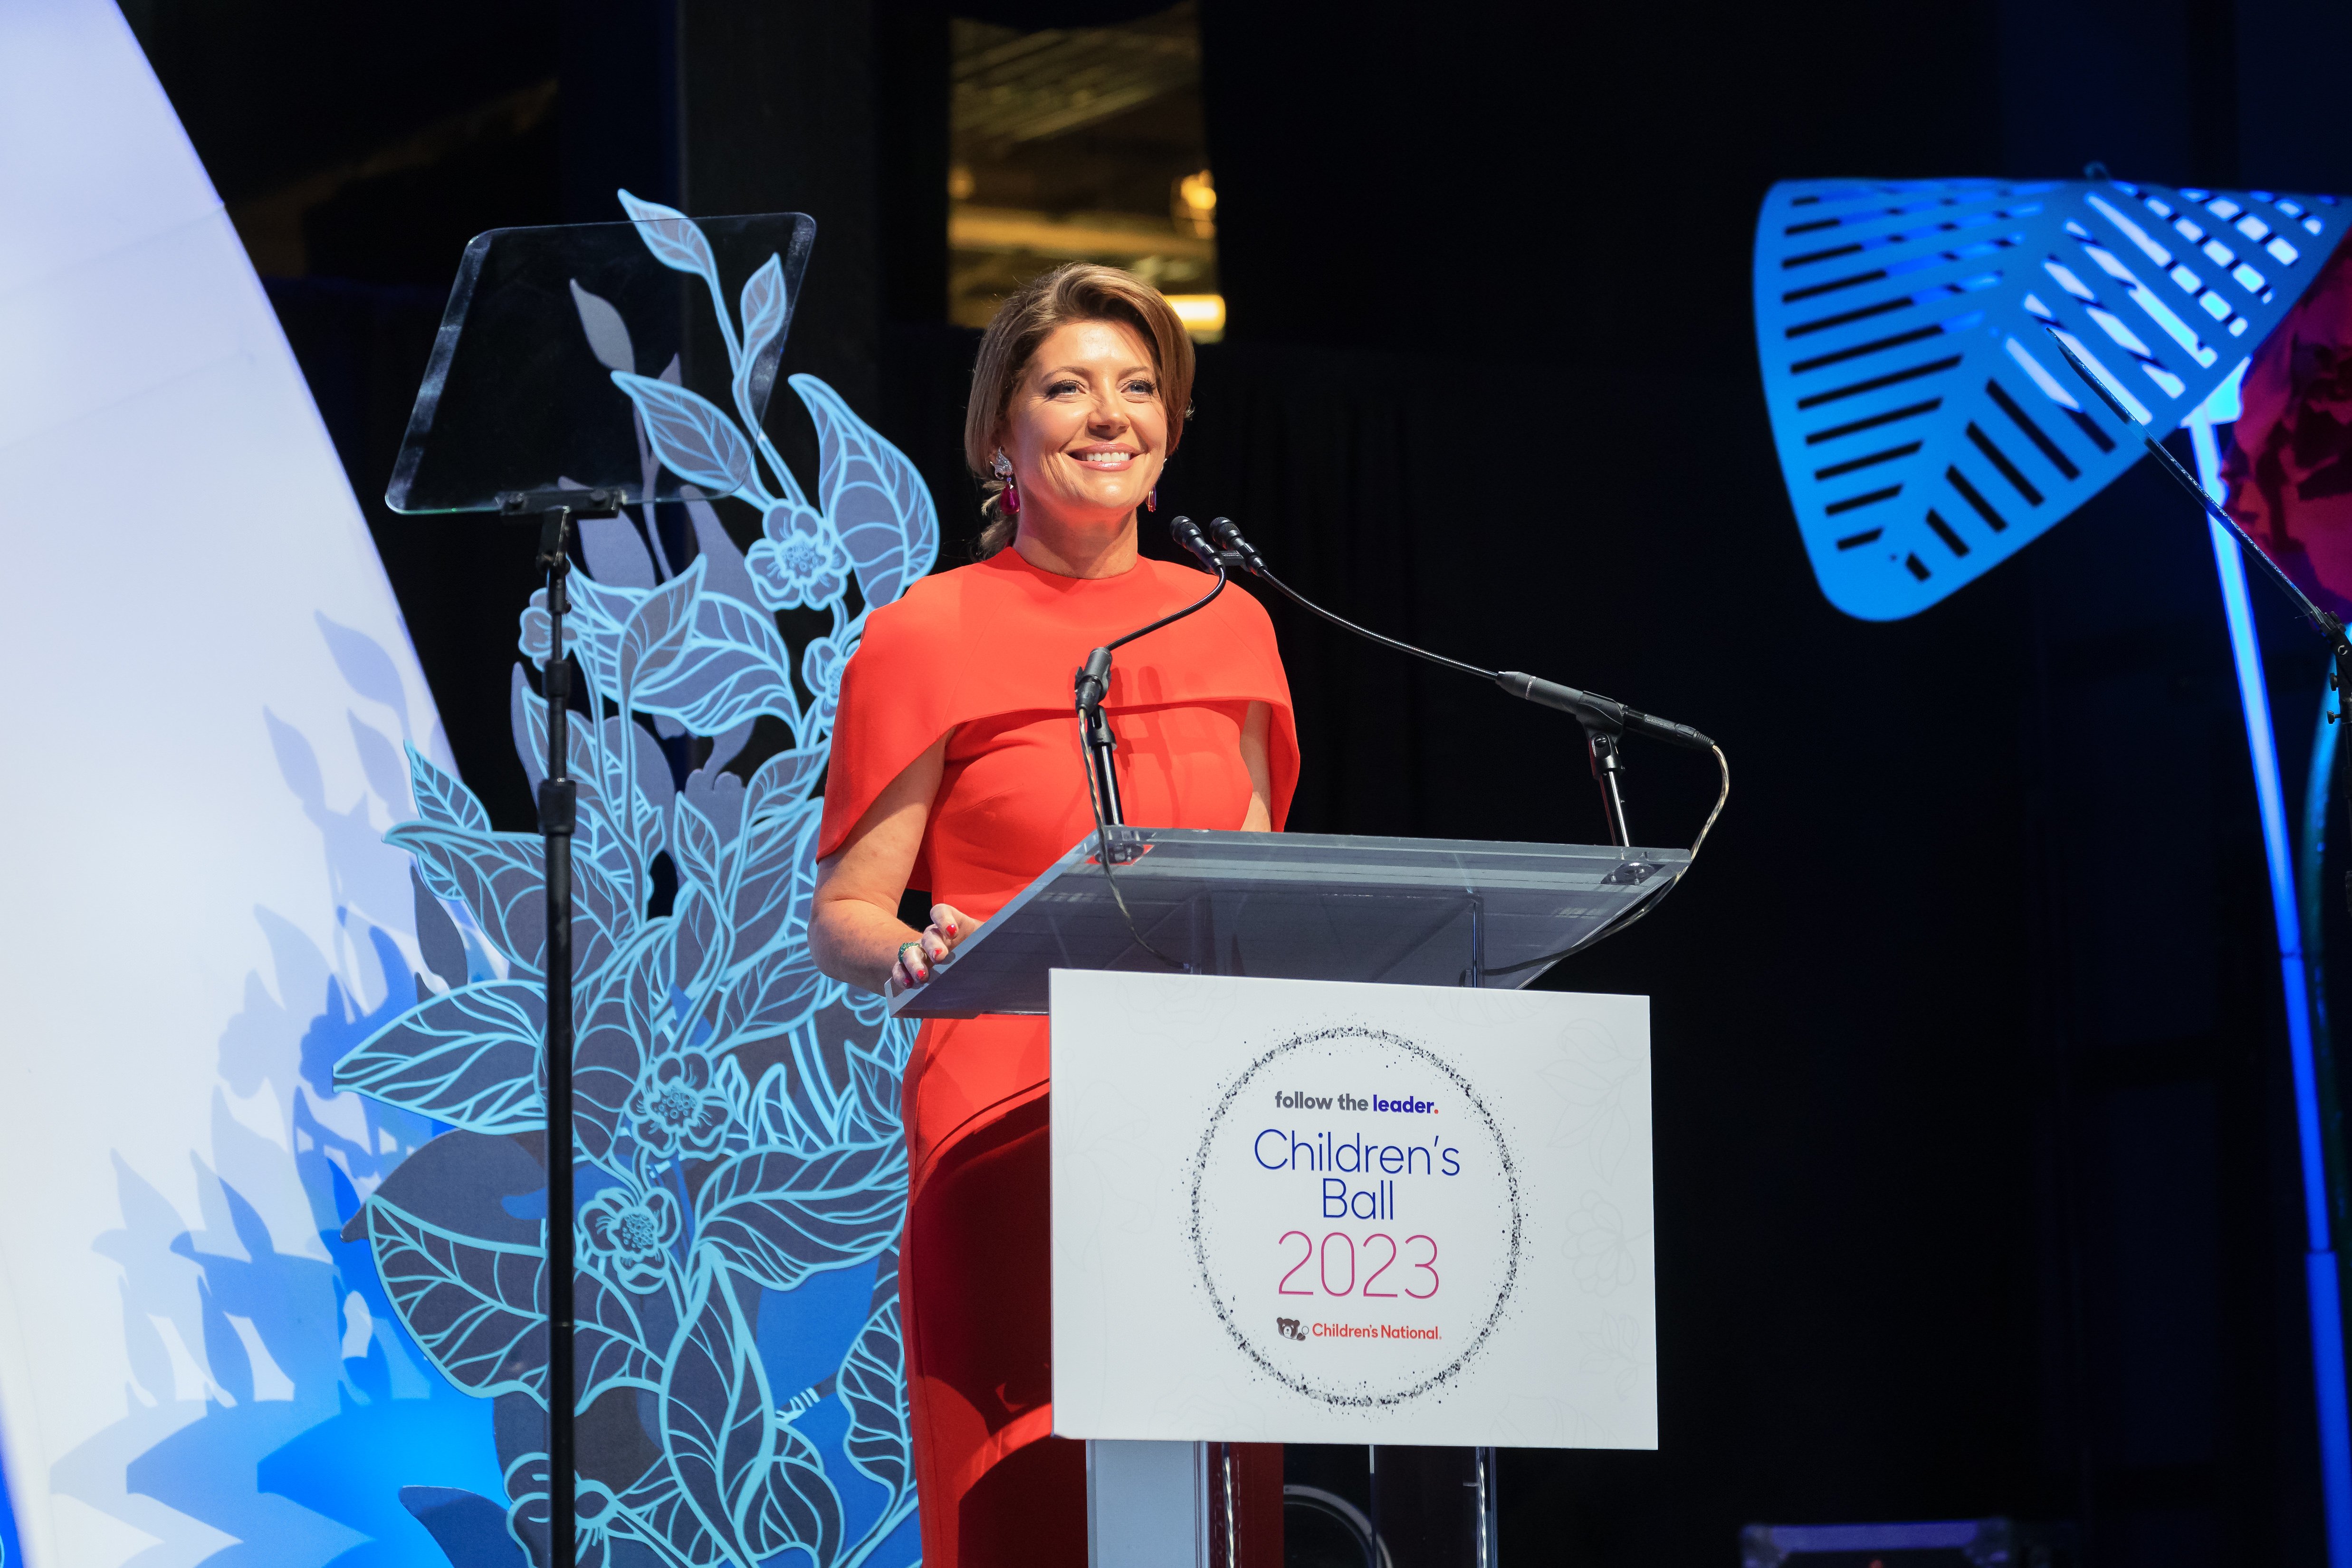 Norah O’Donnell, anchor and managing editor of the CBS Evening News, co-hosts the live auction.